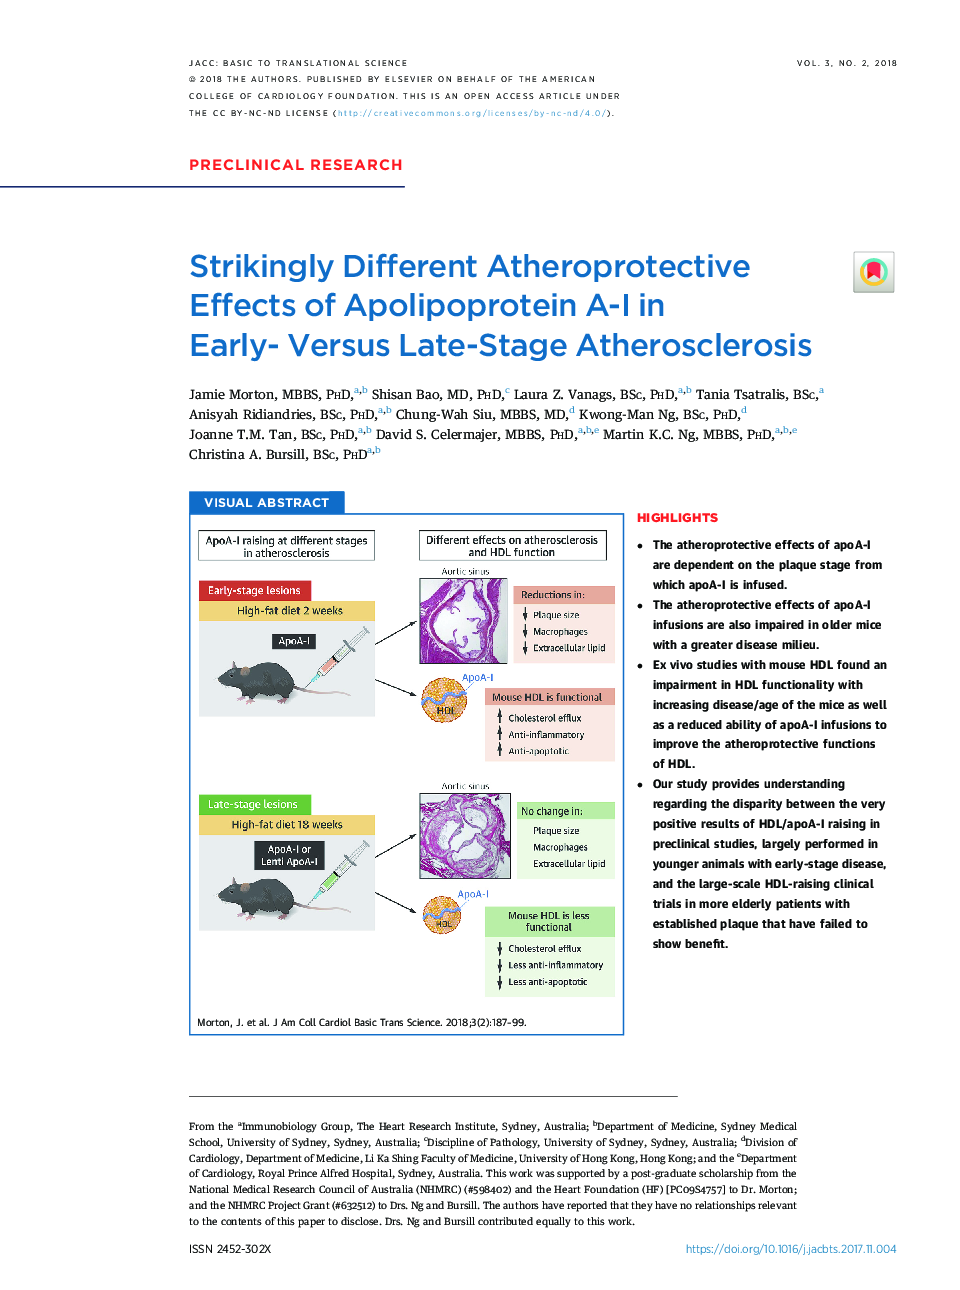 Strikingly Different Atheroprotective Effects of Apolipoprotein A-I in Early-Â Versus Late-Stage Atherosclerosis